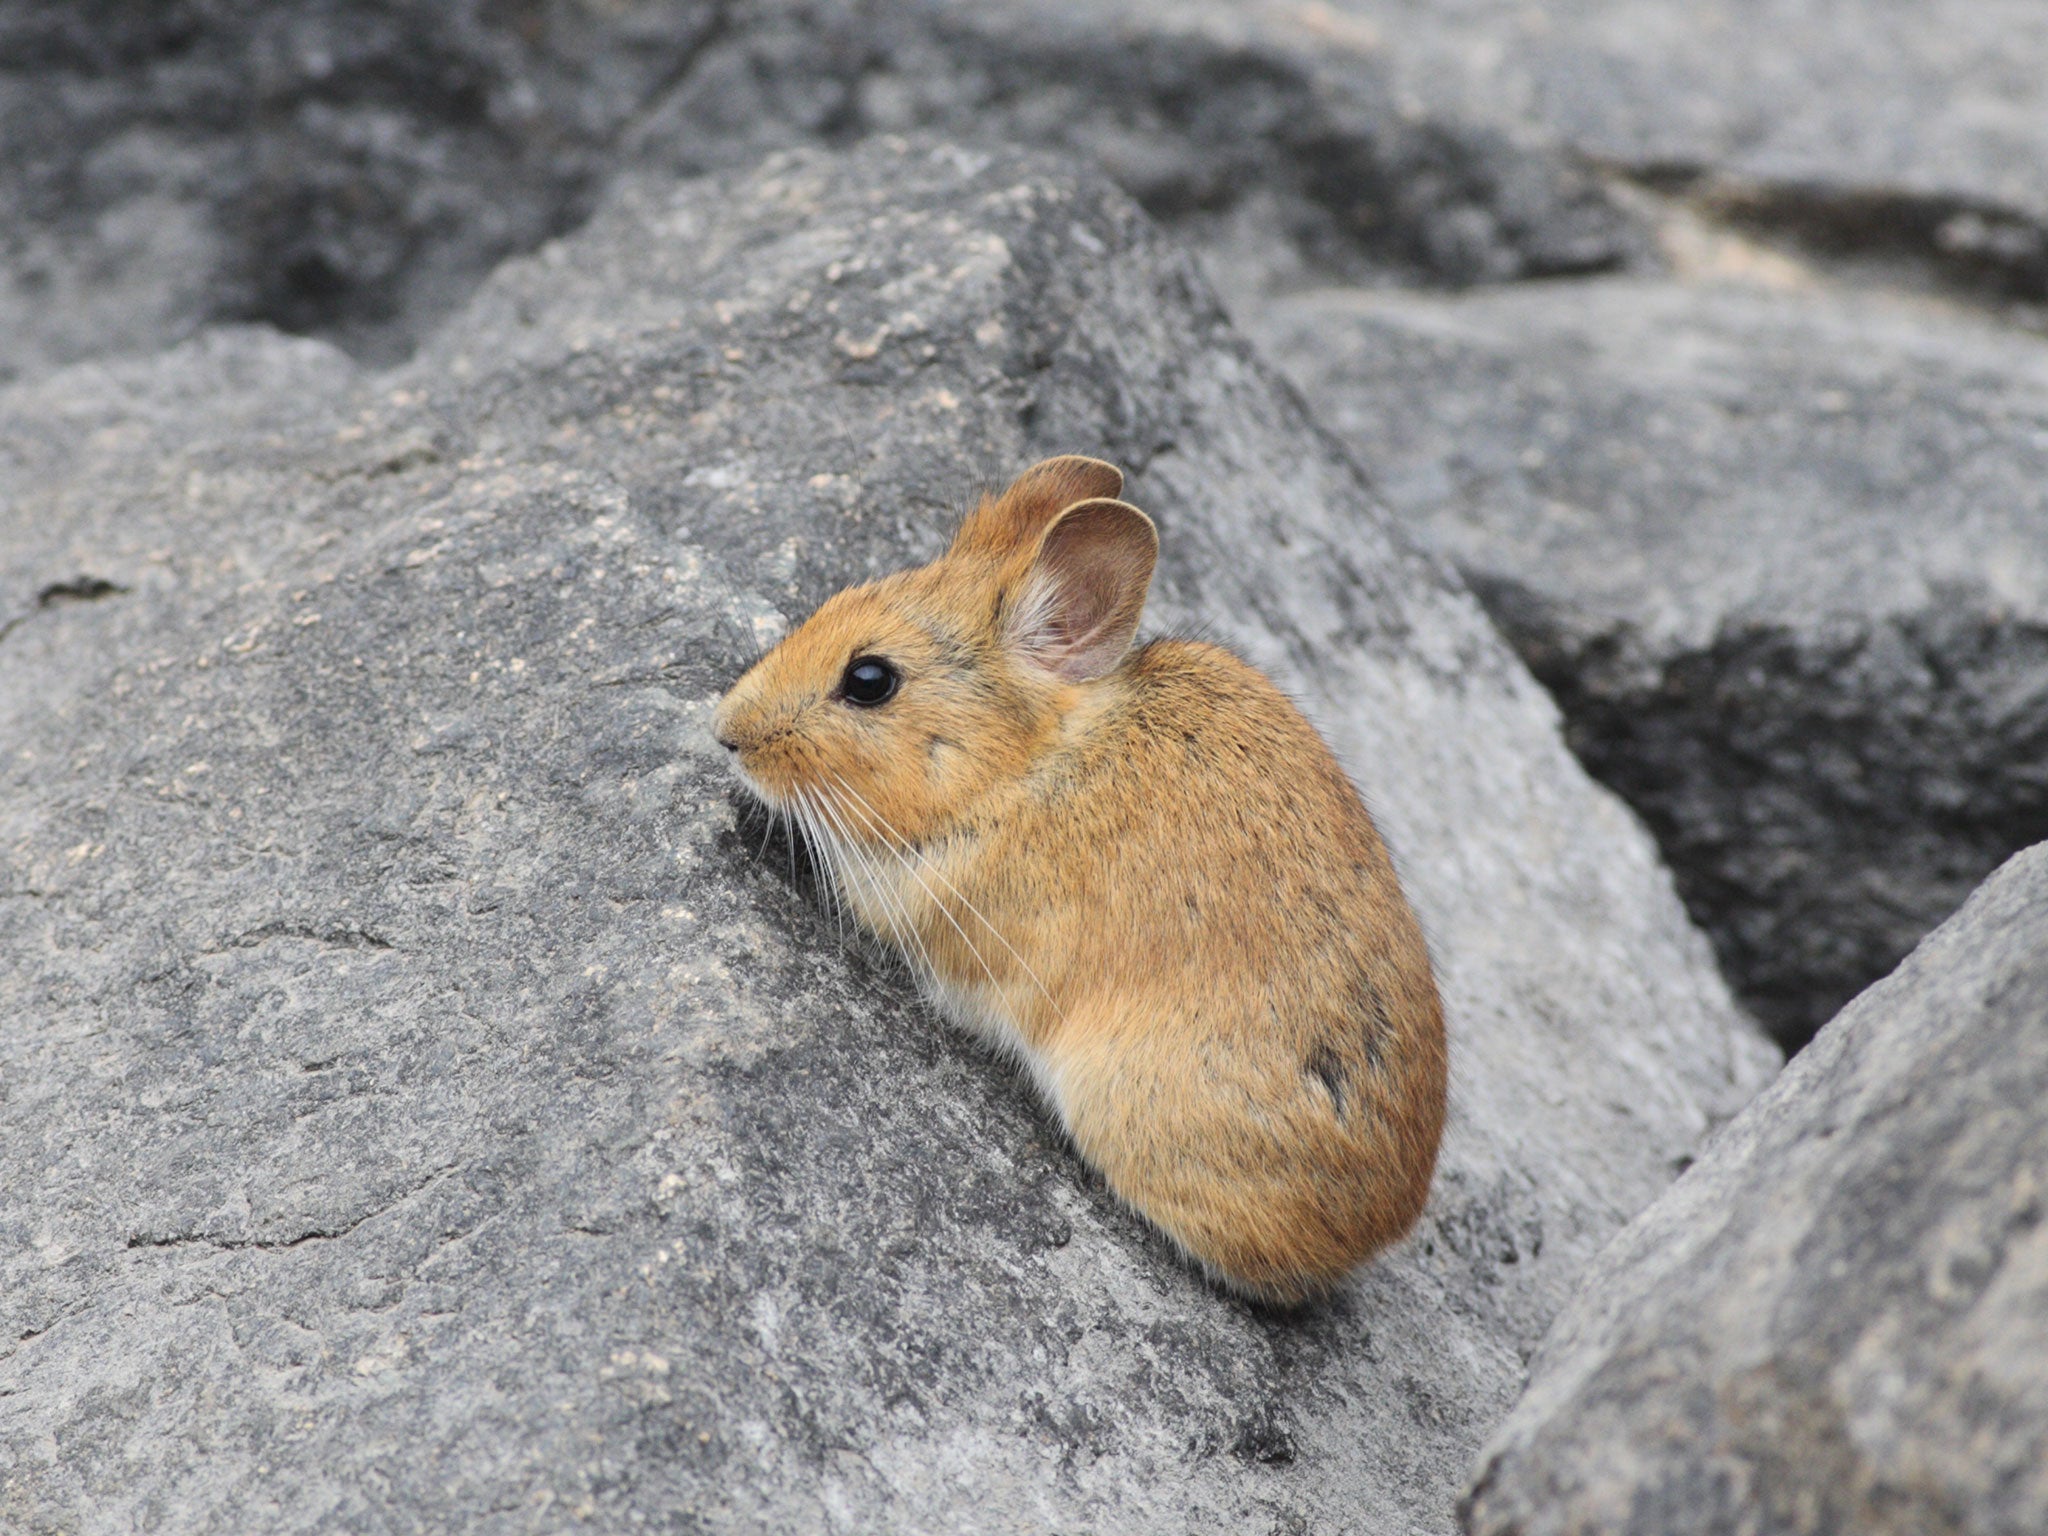 A Chinese red pika (Ochotona erythrotis) standing on a rock in the Mengda Nature Reserve, Qinghai Province, China (REX)